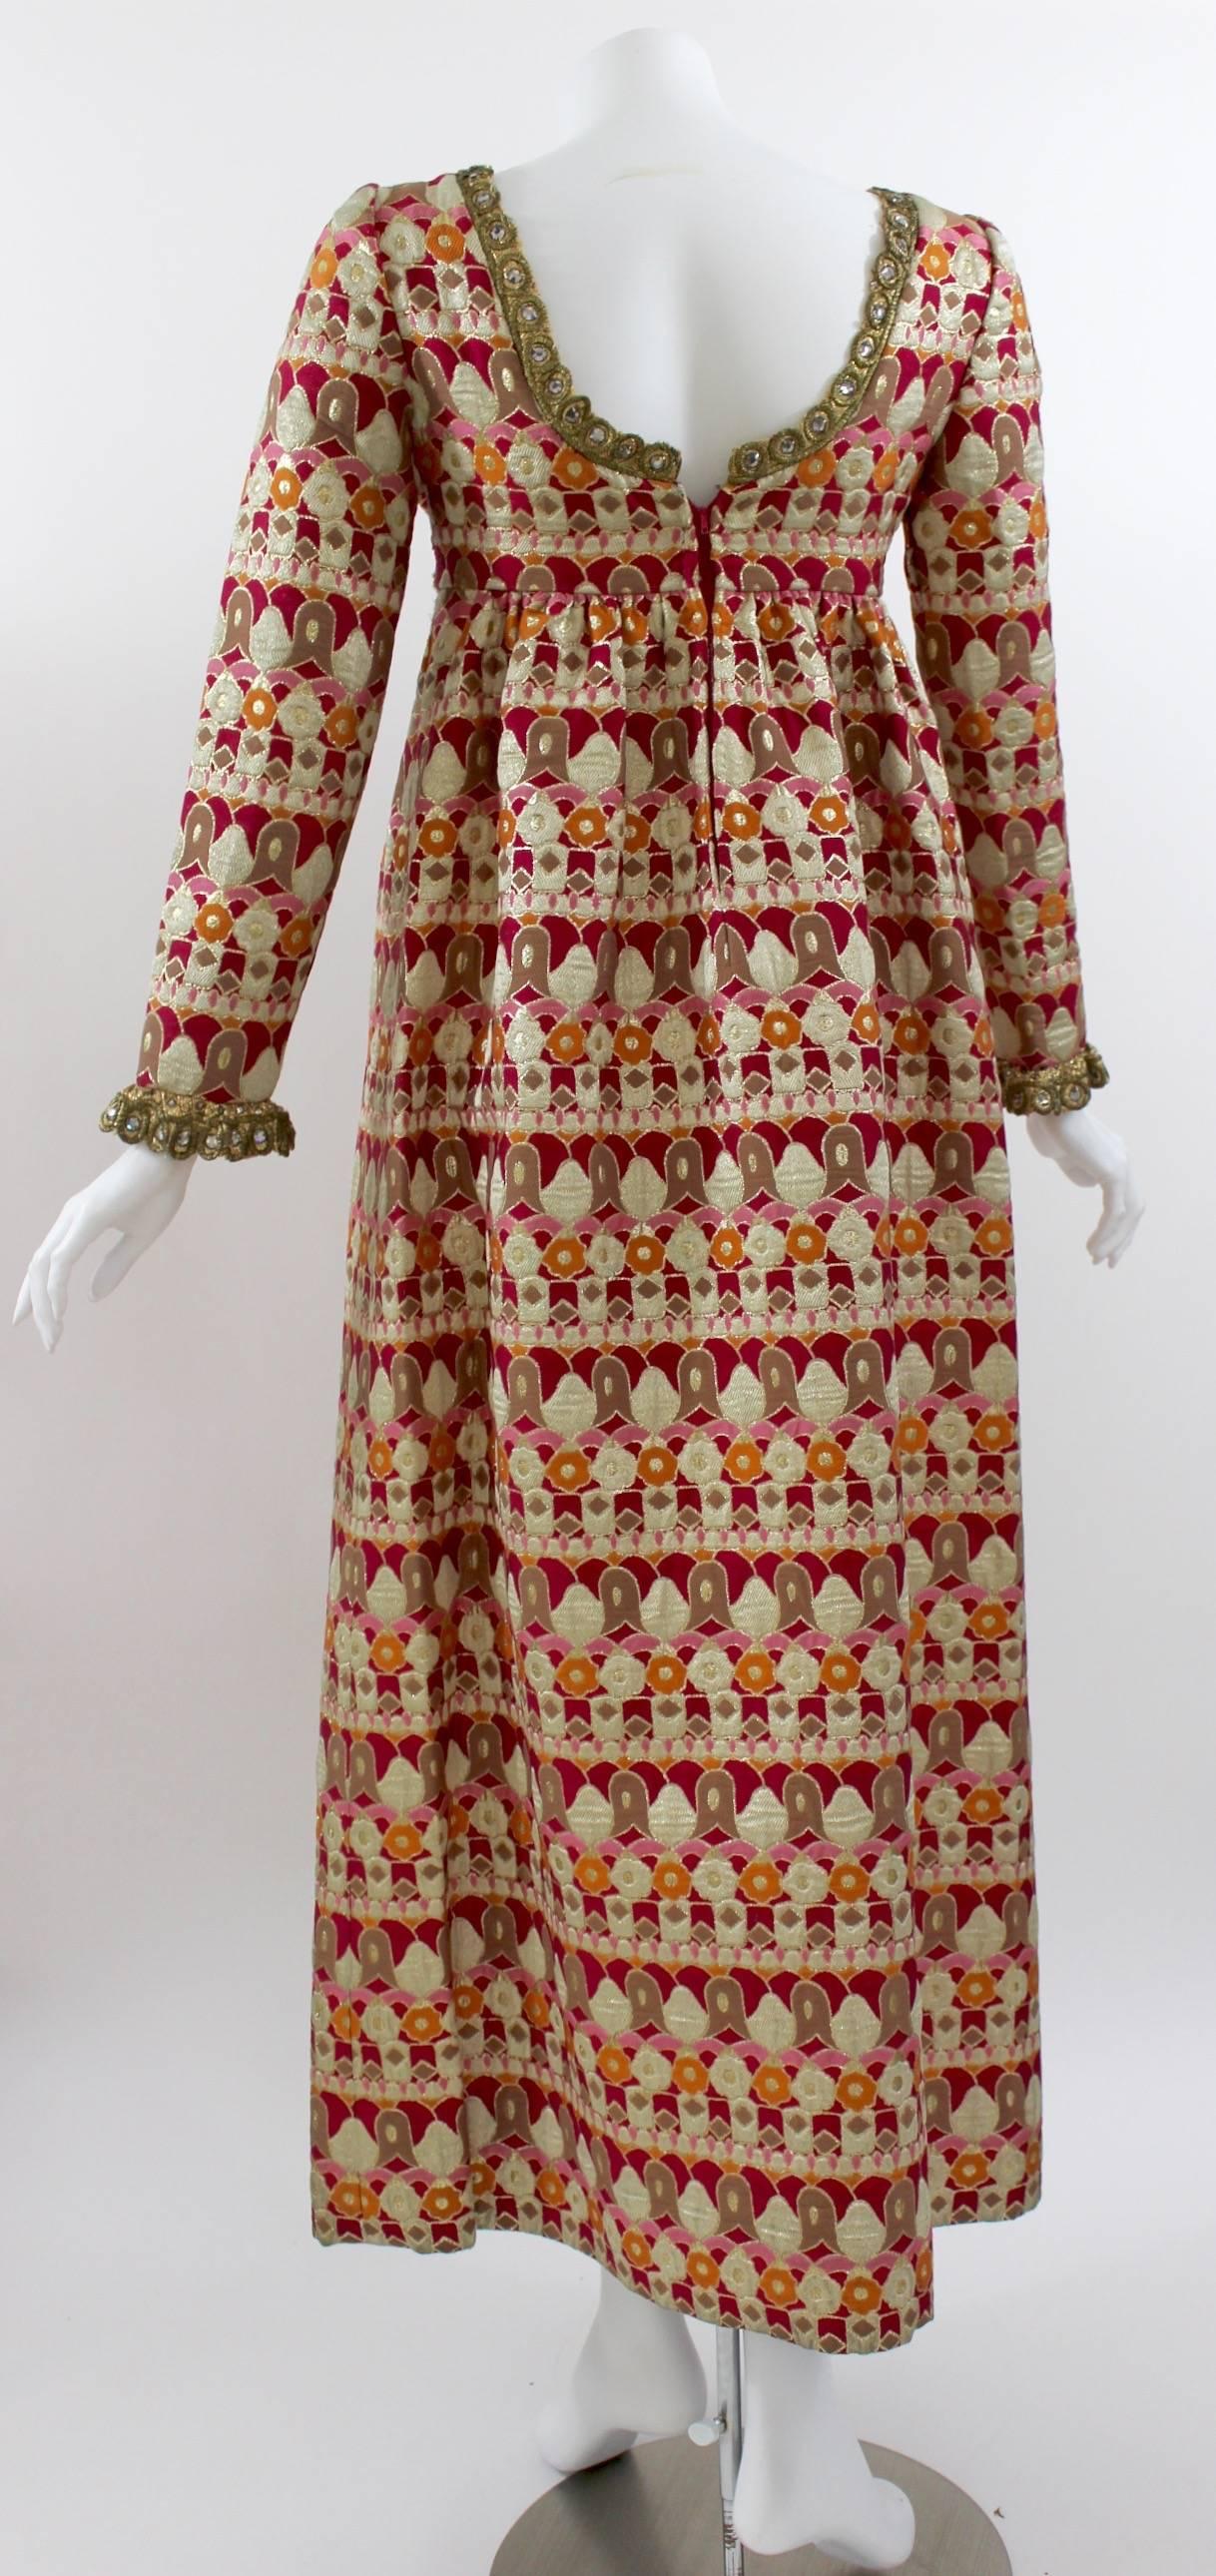 A 1960s Nan Duskin Couture Metallic Brocade Empire Waist Dress  In Excellent Condition For Sale In Boca Raton, FL